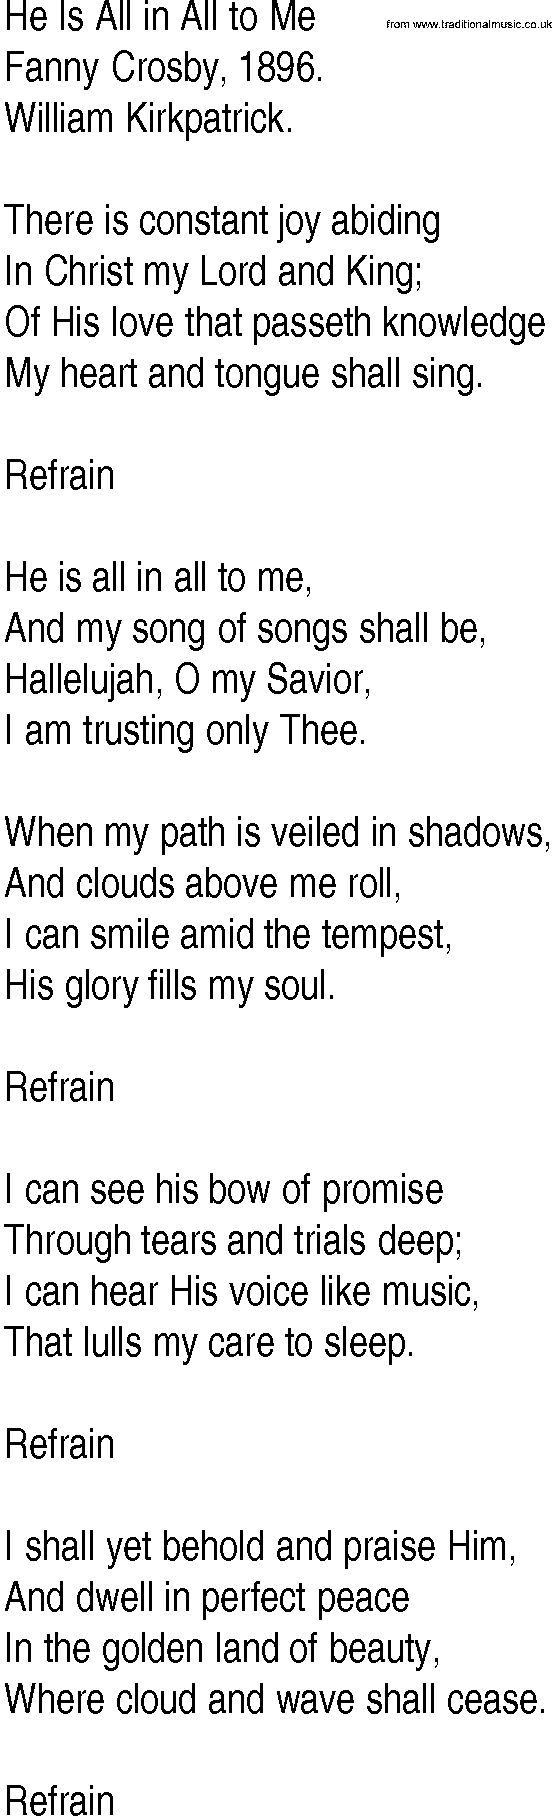 Hymn and Gospel Song: He Is All in All to Me by Fanny Crosby lyrics